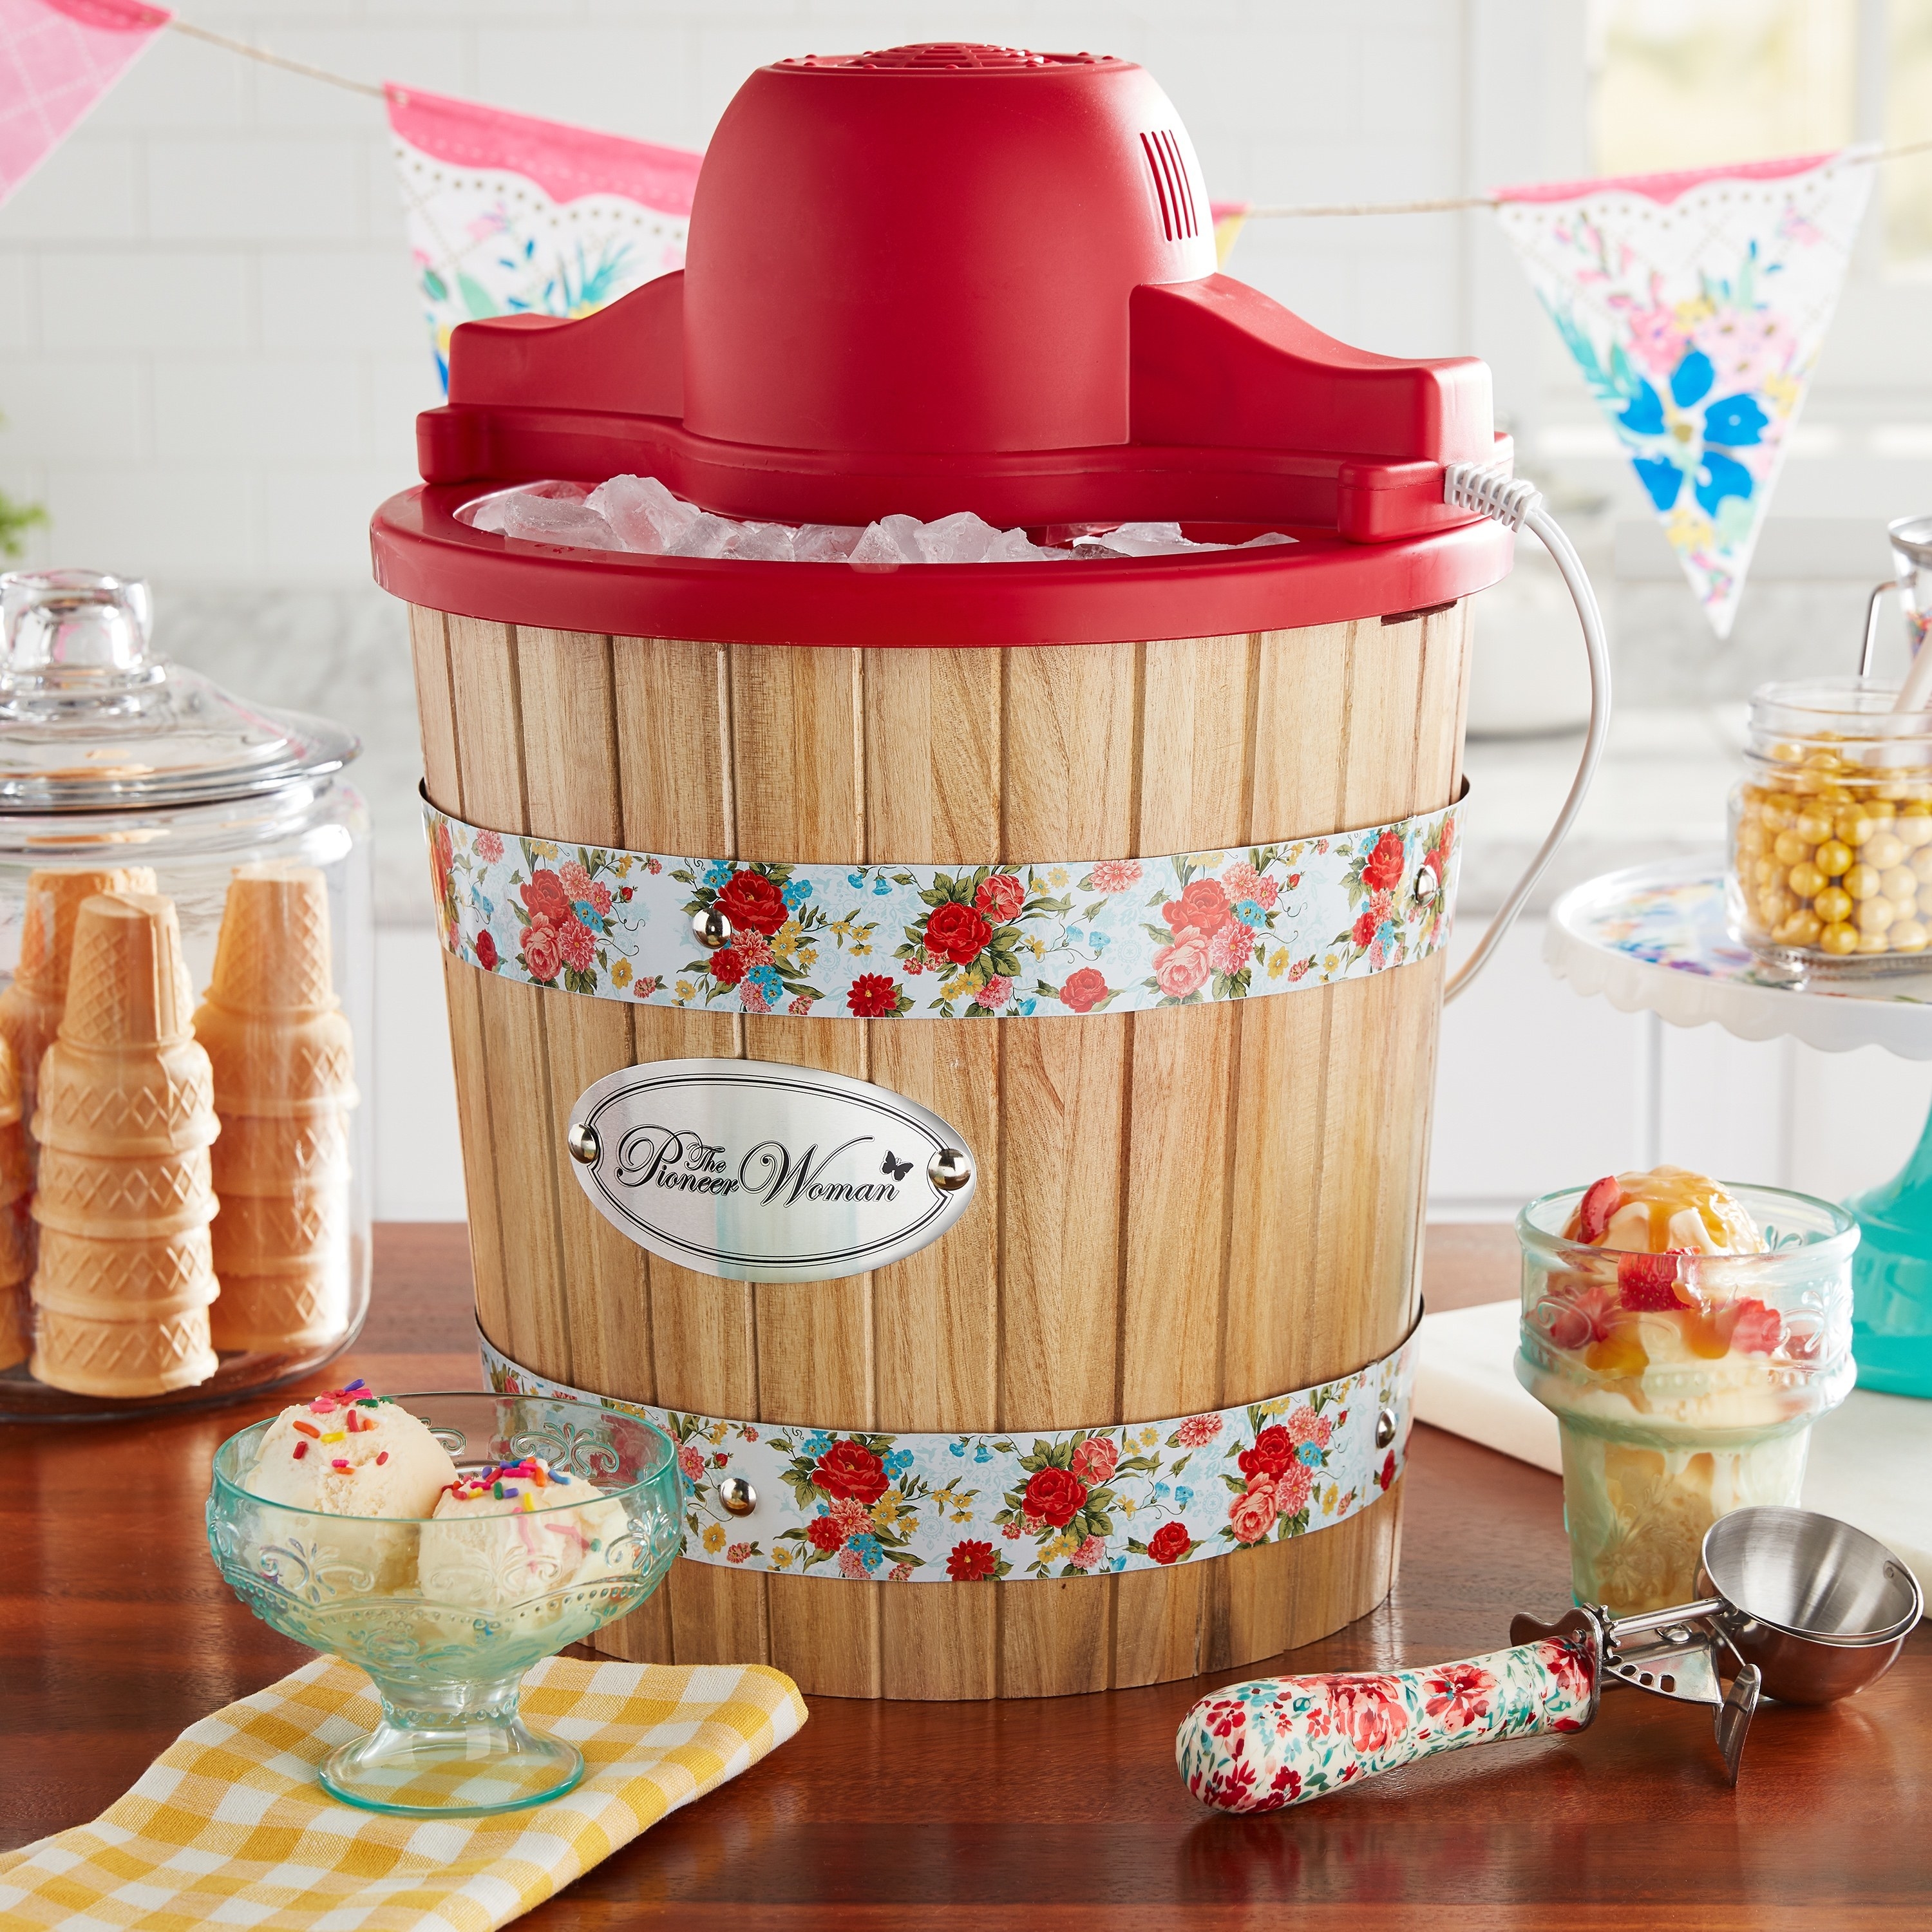 the red, wood, and floral ice cream maker